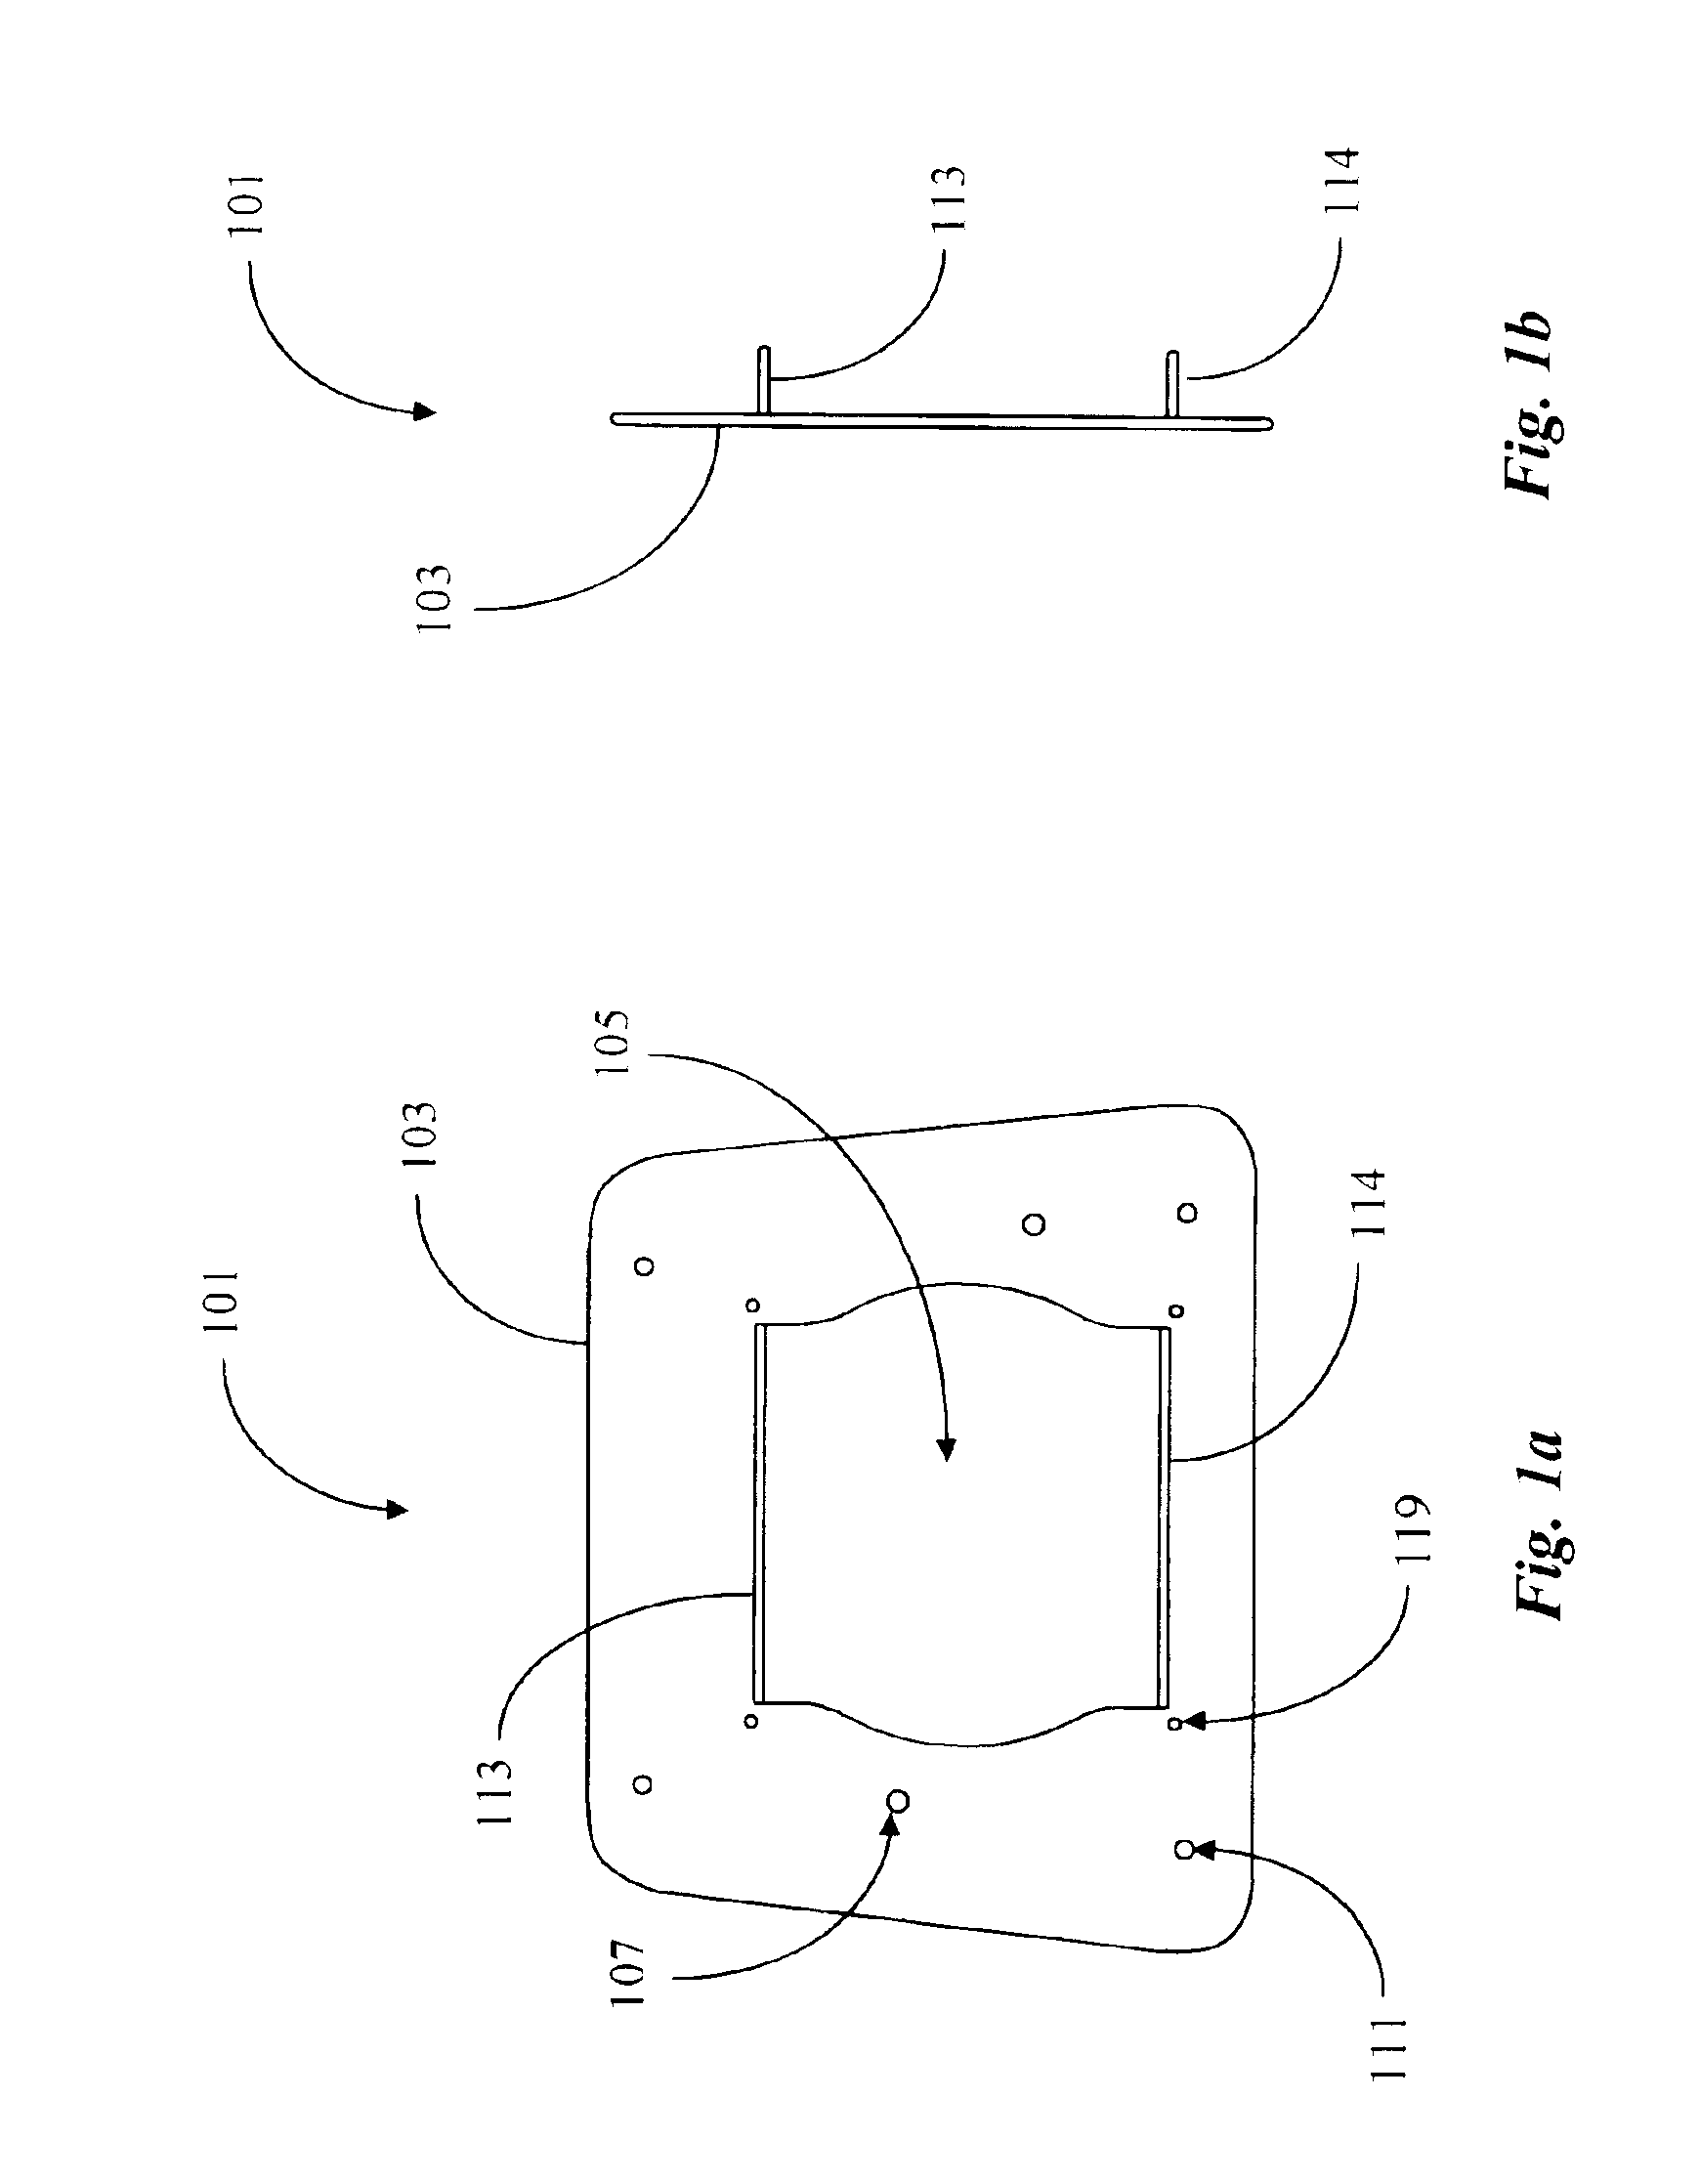 Method and apparatus for efficiently cooling motorcycle engines